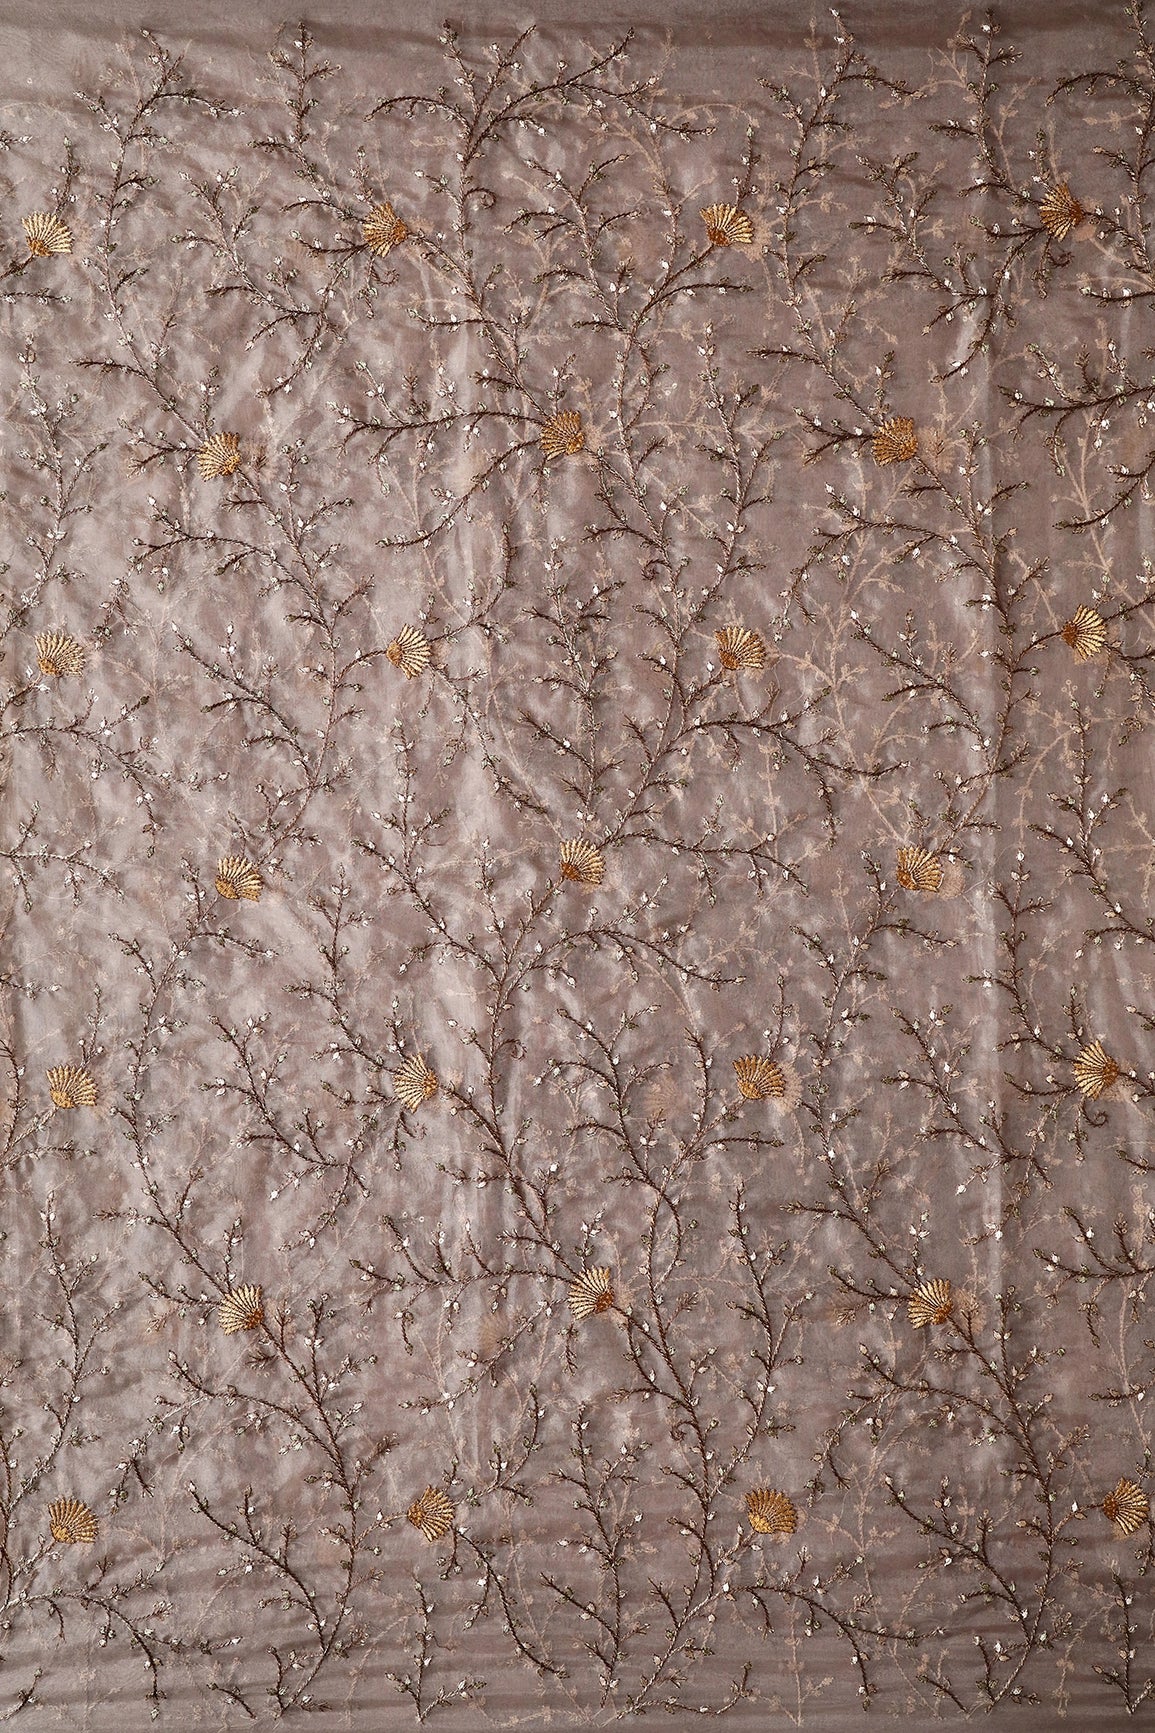 3.25 Meter Cut Piece Of Brown And Cream Thread With Gold Sequins Leafy Embroidery On Light Brown Organza Fabric